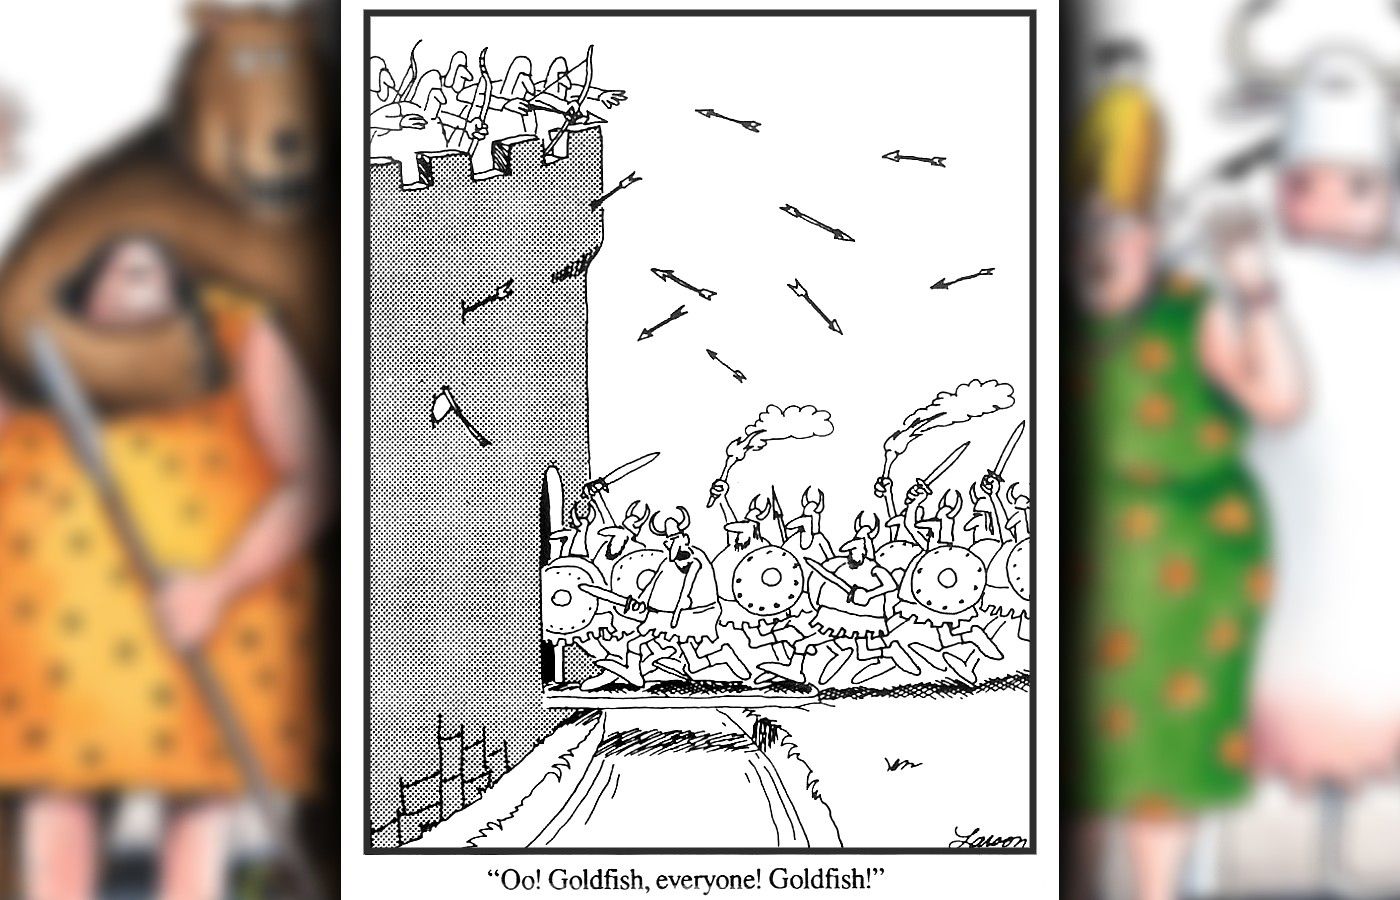 far side comic where a viking spots a goldfish while storming a castle